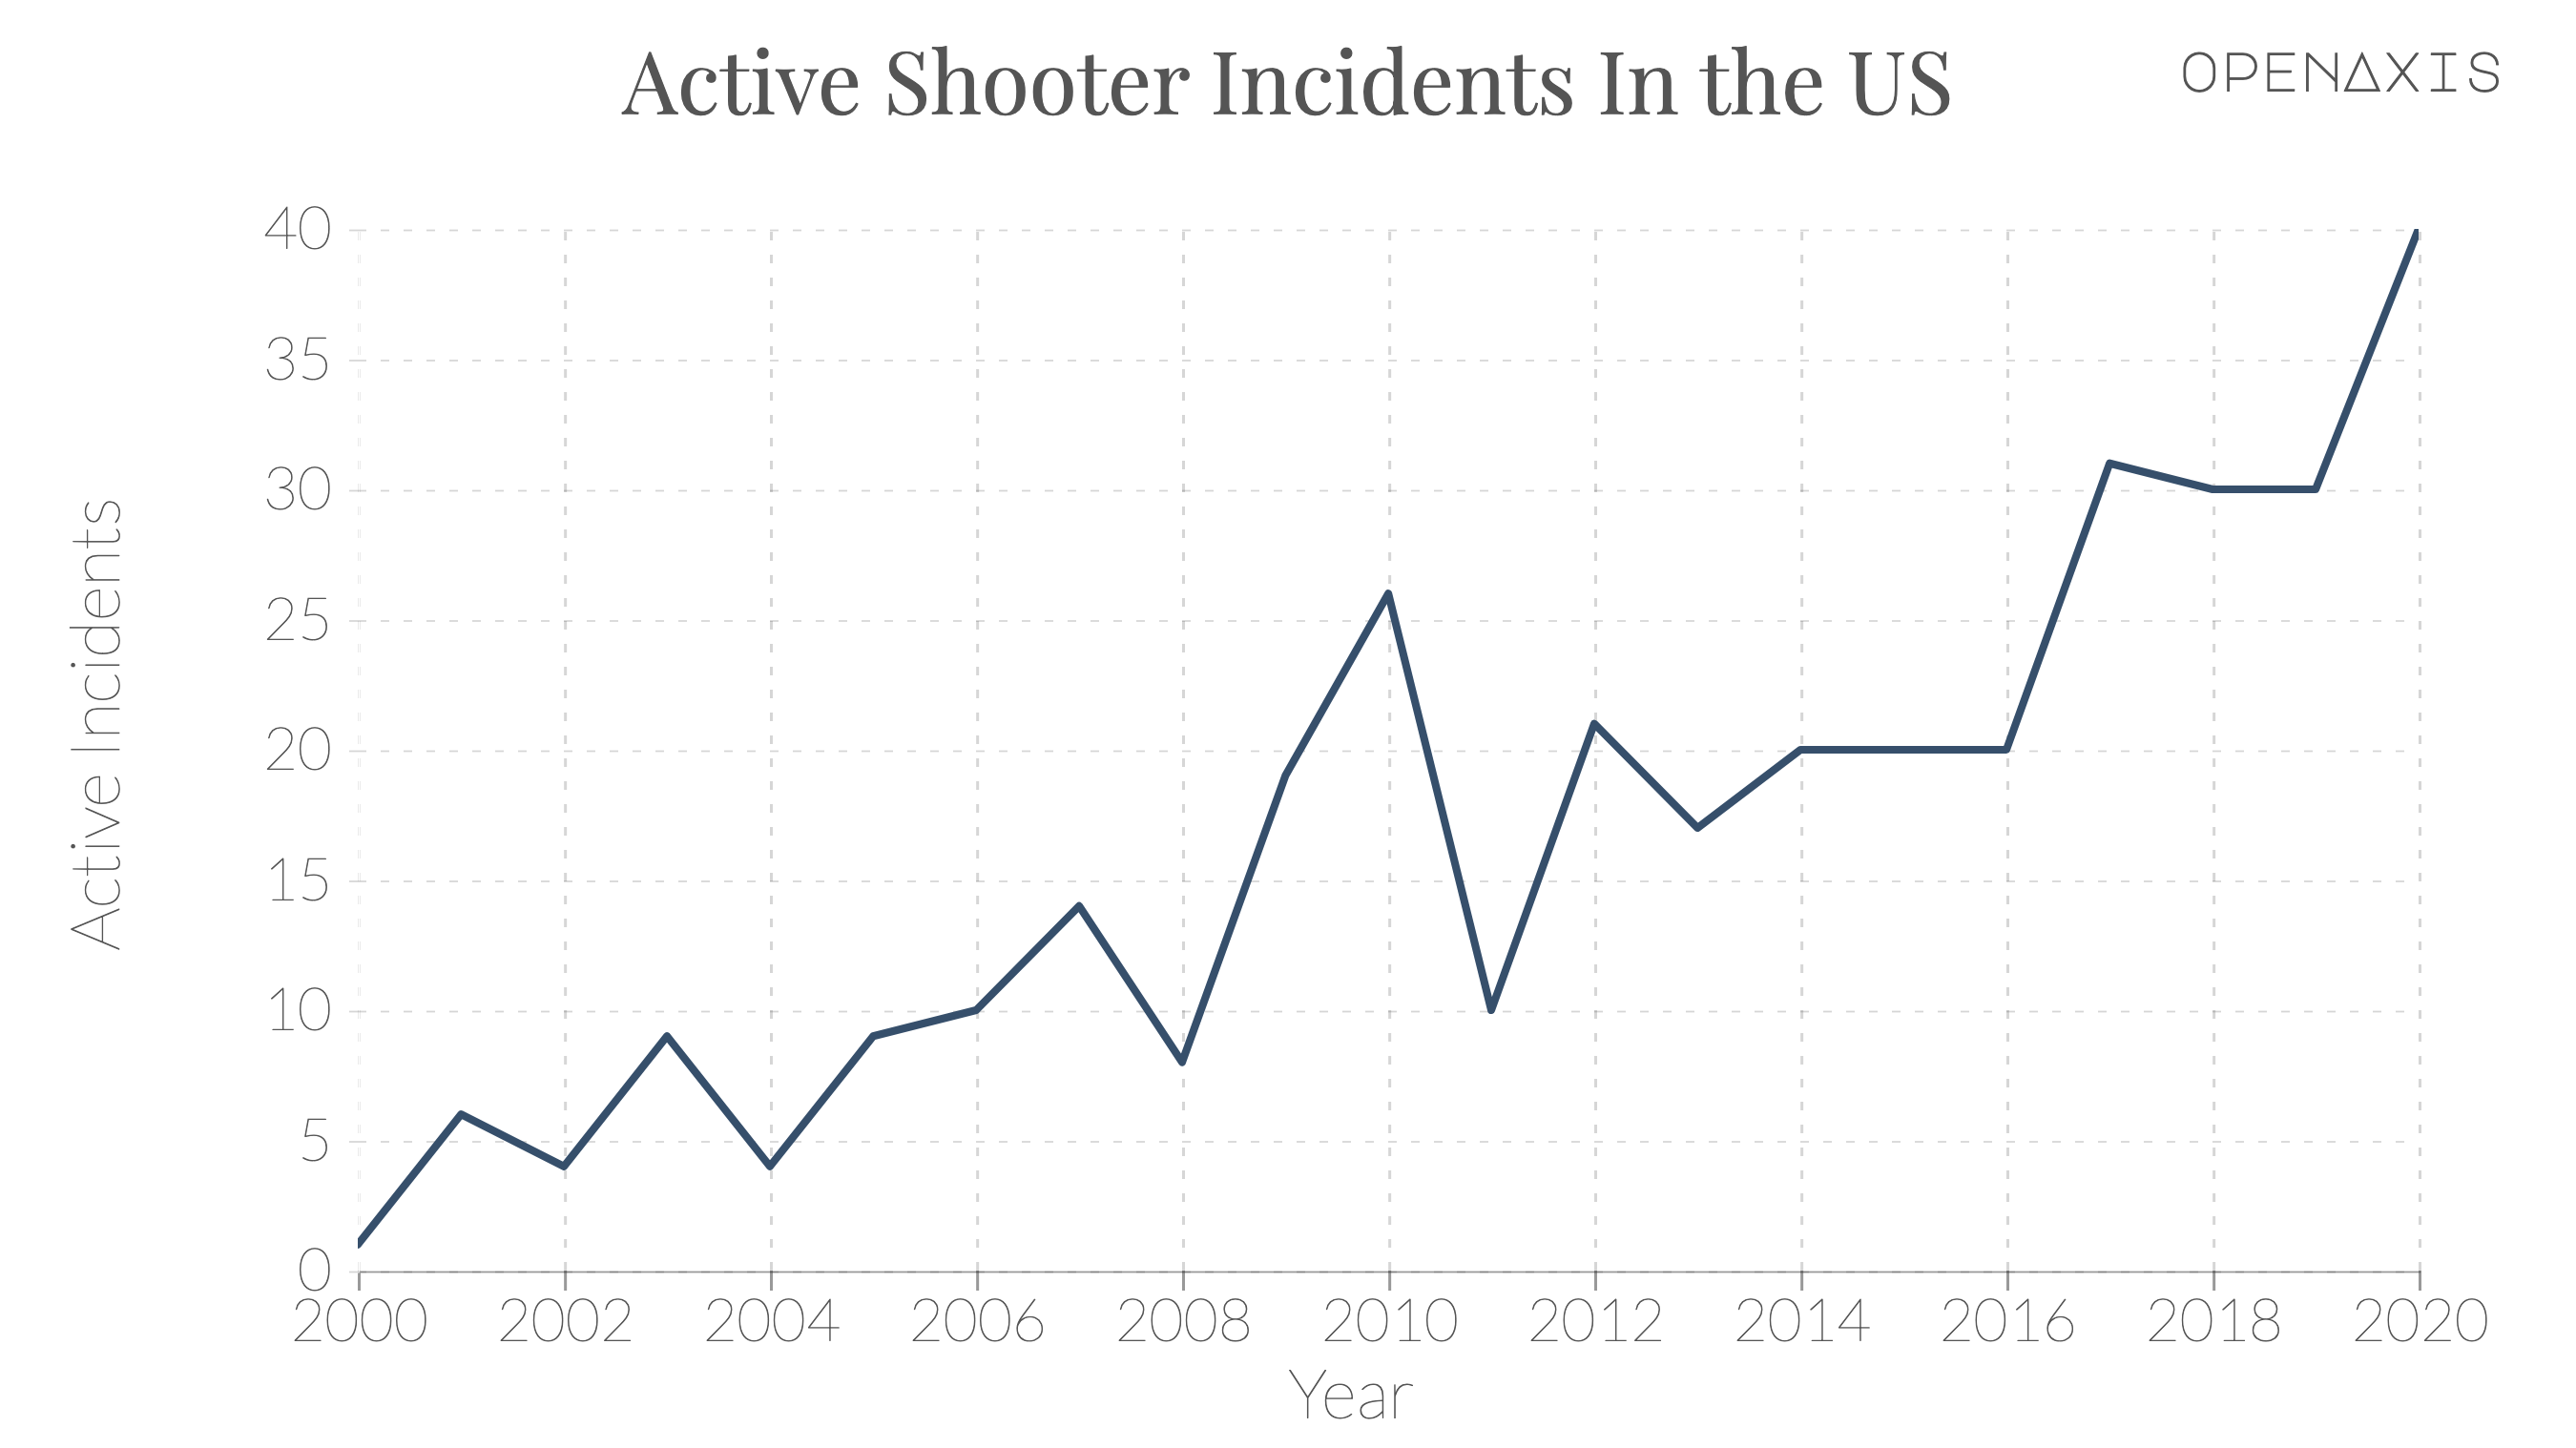 <p><em>Number of Active Shooter Incidents in the US from 2000 to 2020; data from the Federal Bureau of Investigation and USA Facts.</em></p><p> #SOTU </p>